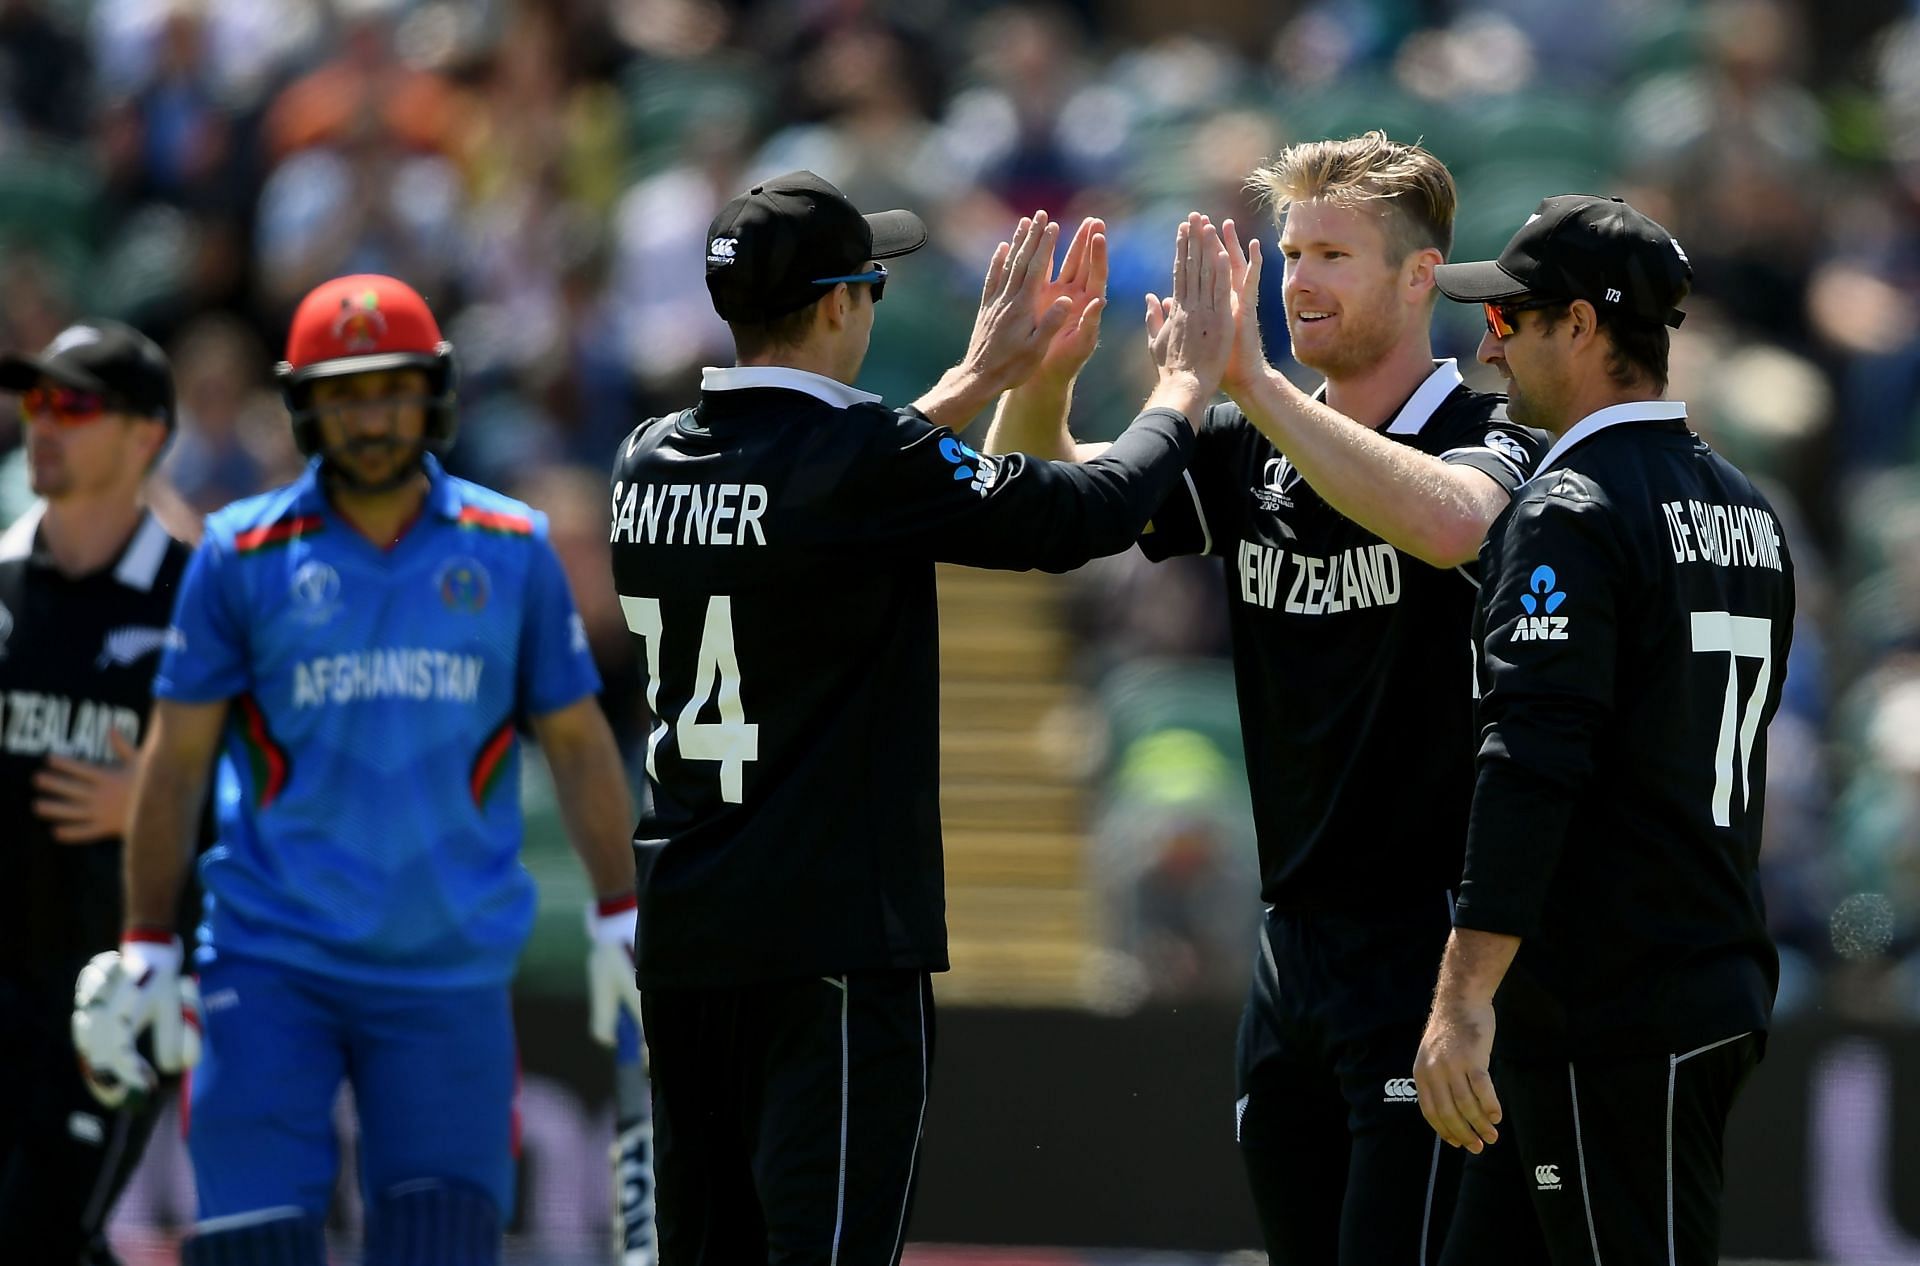 Can New Zealand win their fourth match of ICC T20 World Cup 2021 at the Sheikh Zayed Stadium?